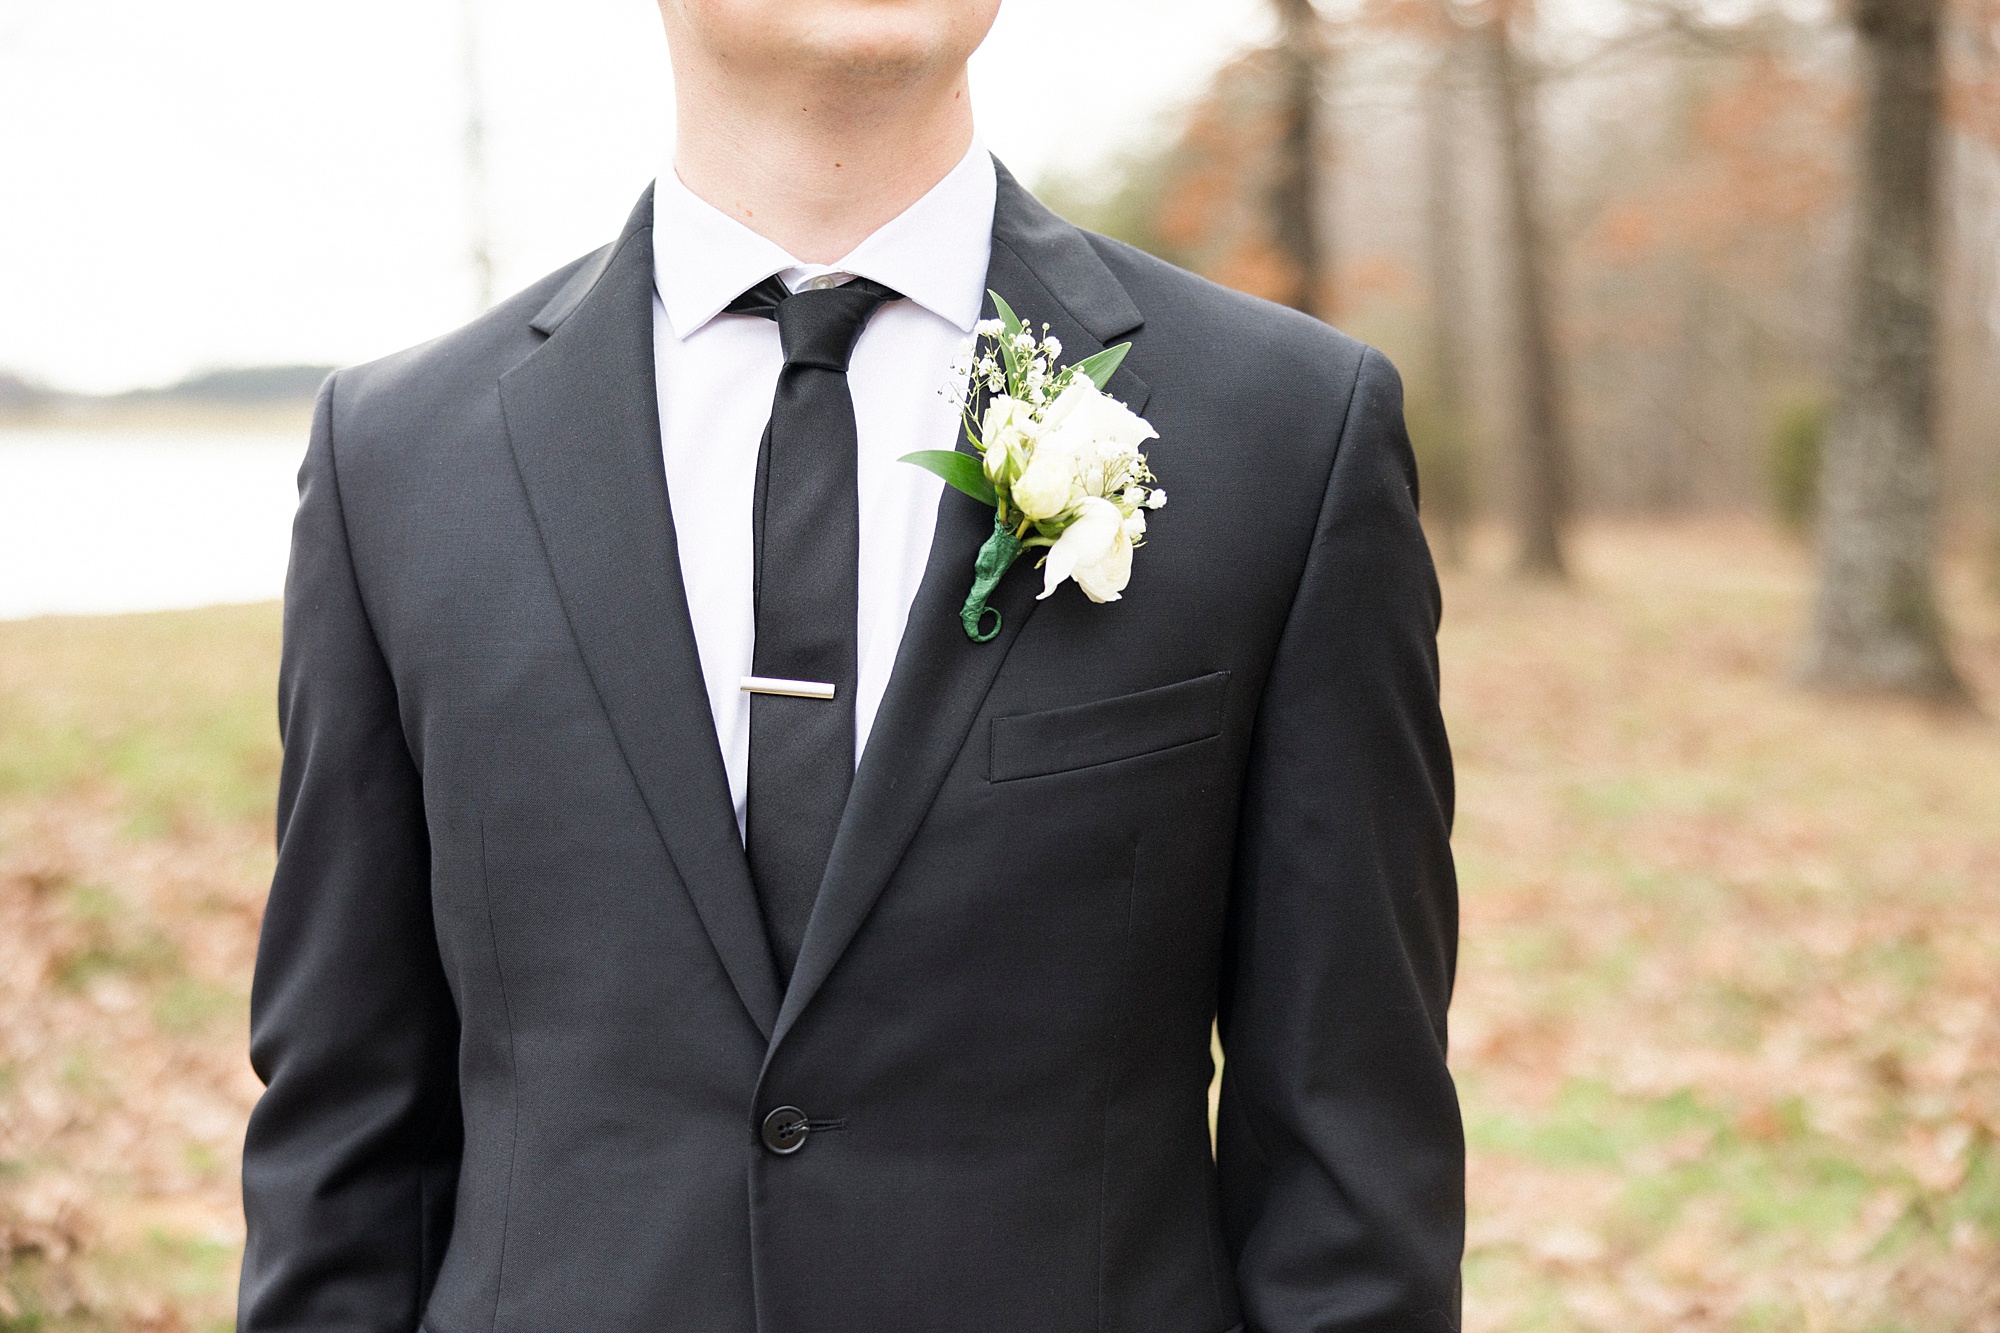 groom's white rose boutonnière for winter wedding day